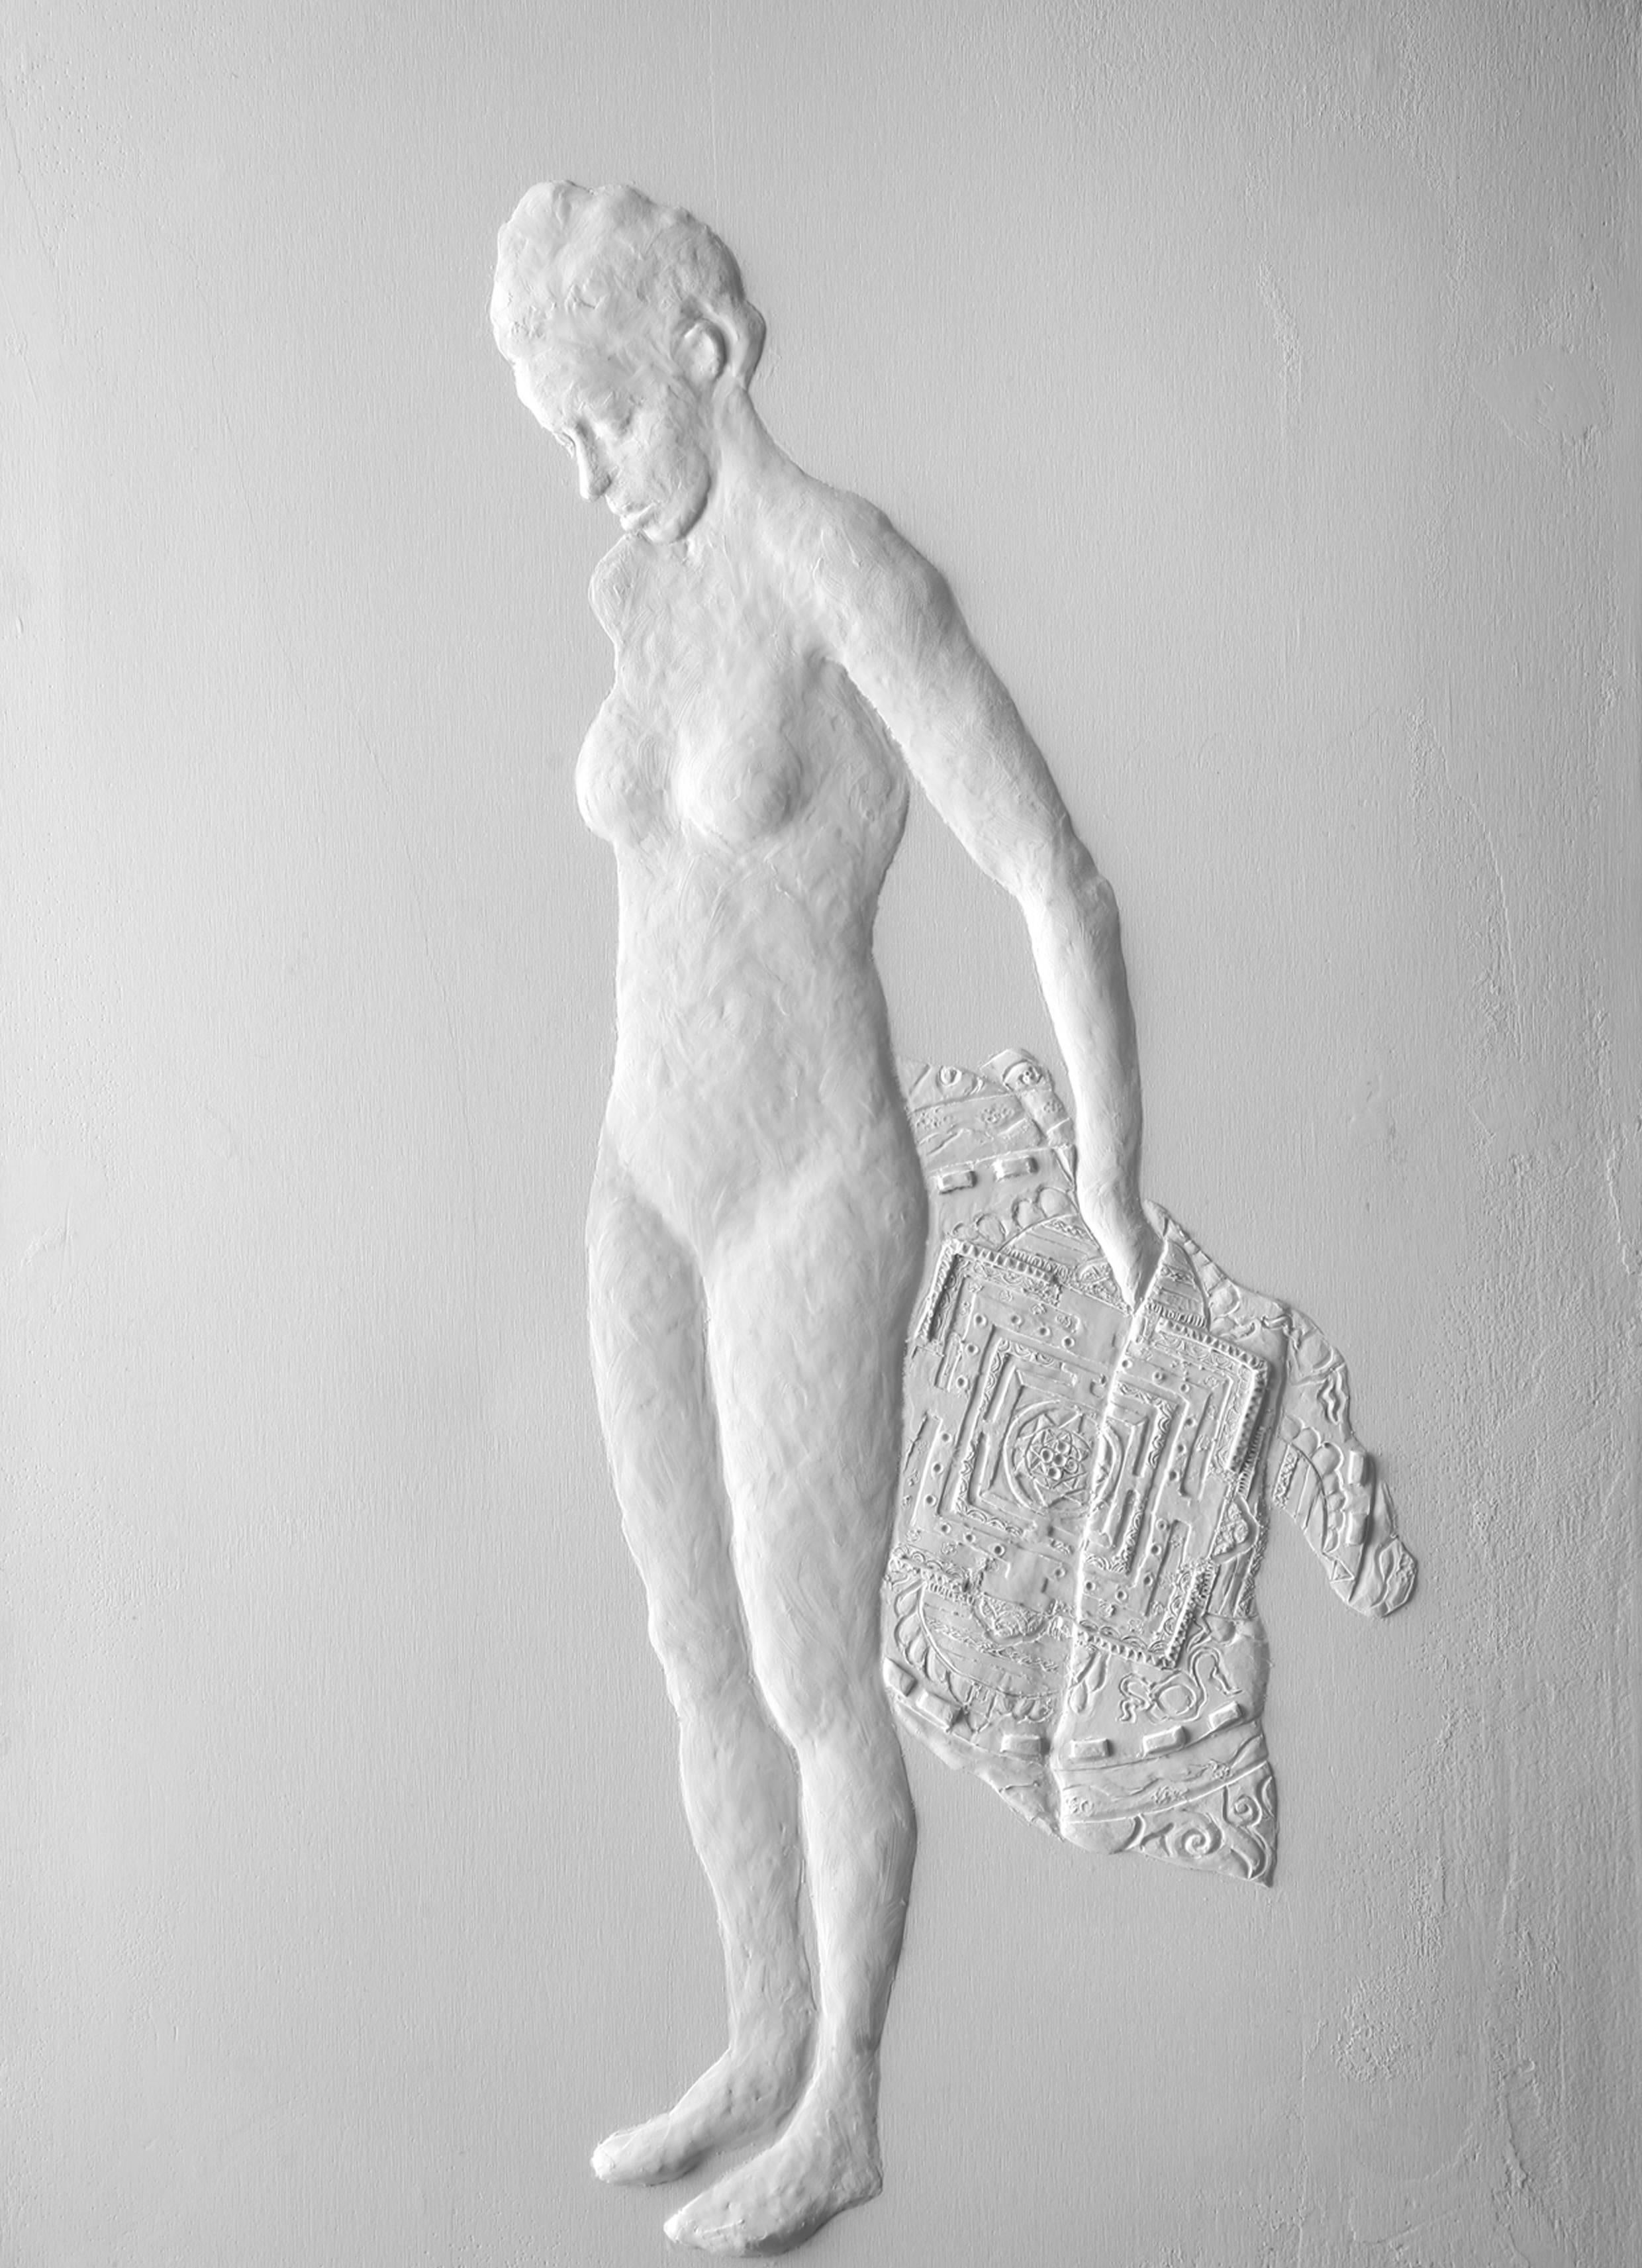 Maja Thommen Figurative Sculpture - "Mandala" Bas Relief Panel from the "Dressing" Series, 2011